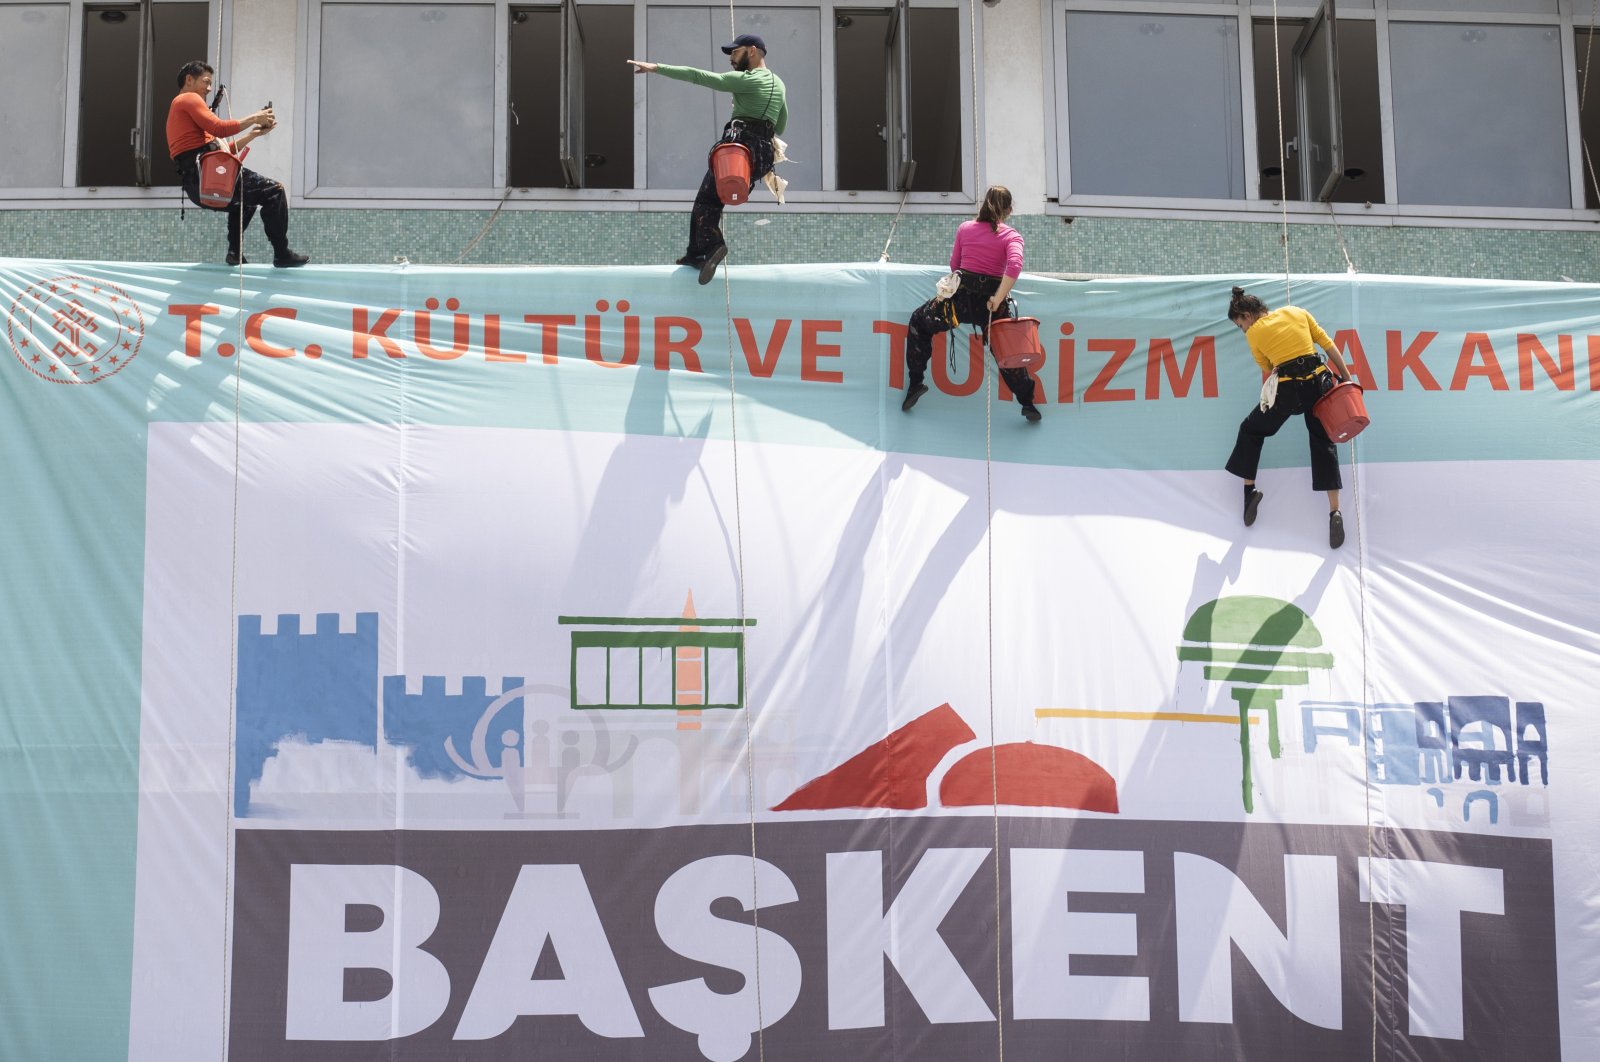 The French performance troupe Les Passagers, who came to Ankara as part of the Culture Road Festival, performed at a height of 35 meters in the building located in Ulus Square, Ankara, Turkey, June 11, 2022. (AA Photo)